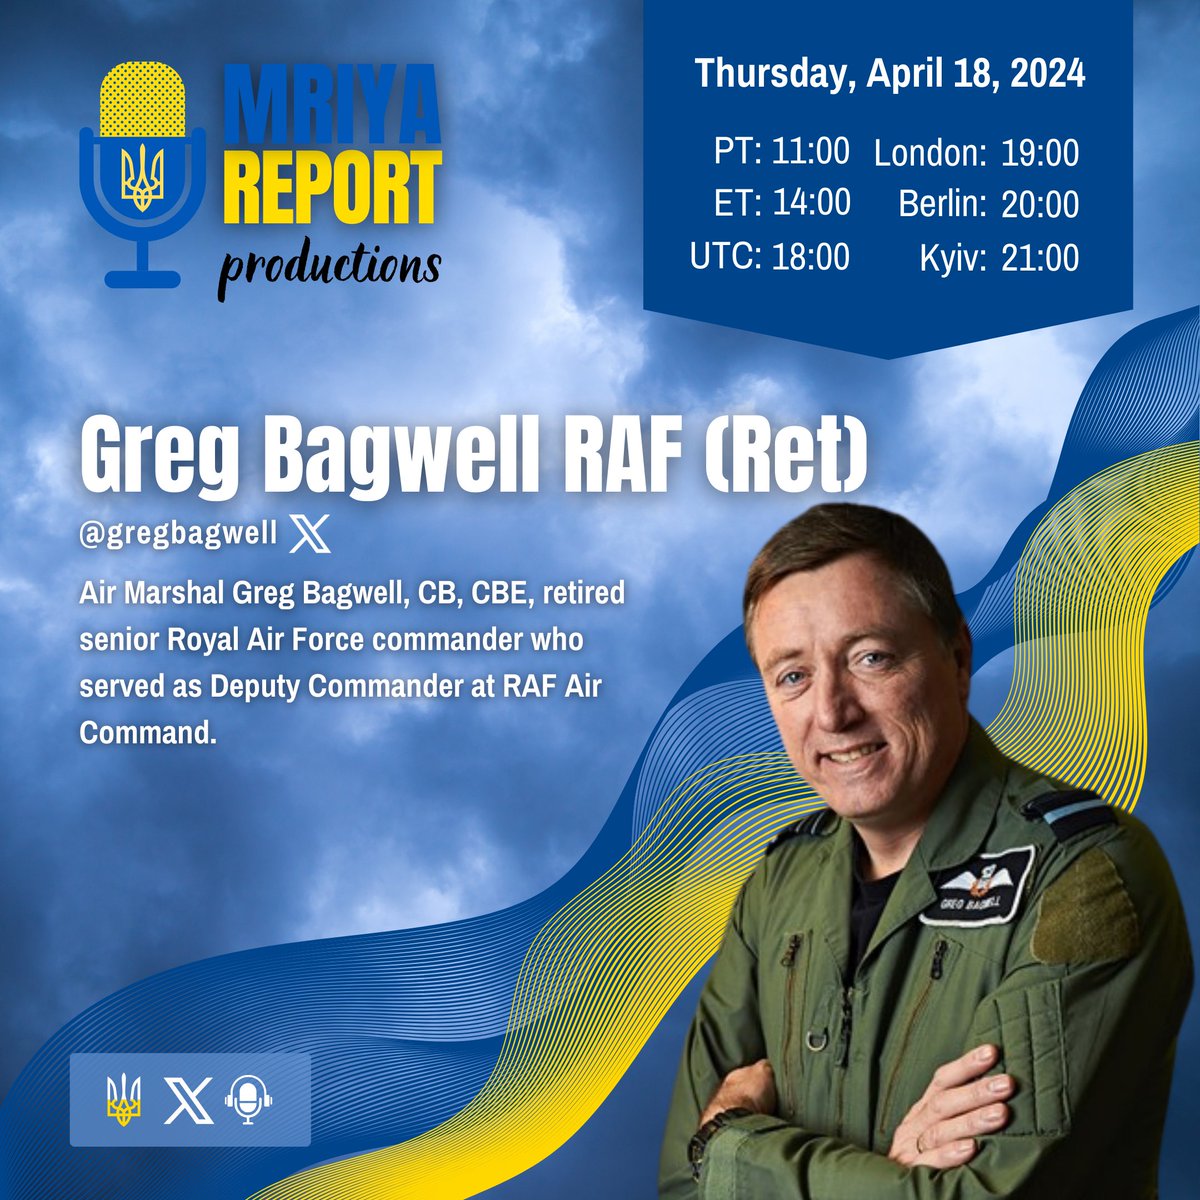 🇺🇦 Please join us Thursday, April 18 🇺🇦 For a conversation with our very special guest Greg Bagwell RAF (Ret) @gregbagwell! Air Marshal Greg Bagwell, CB, CBE, is a retired senior Royal Air Force commander who served as Deputy Commander at RAF Air Command. ✈️ An absolute…